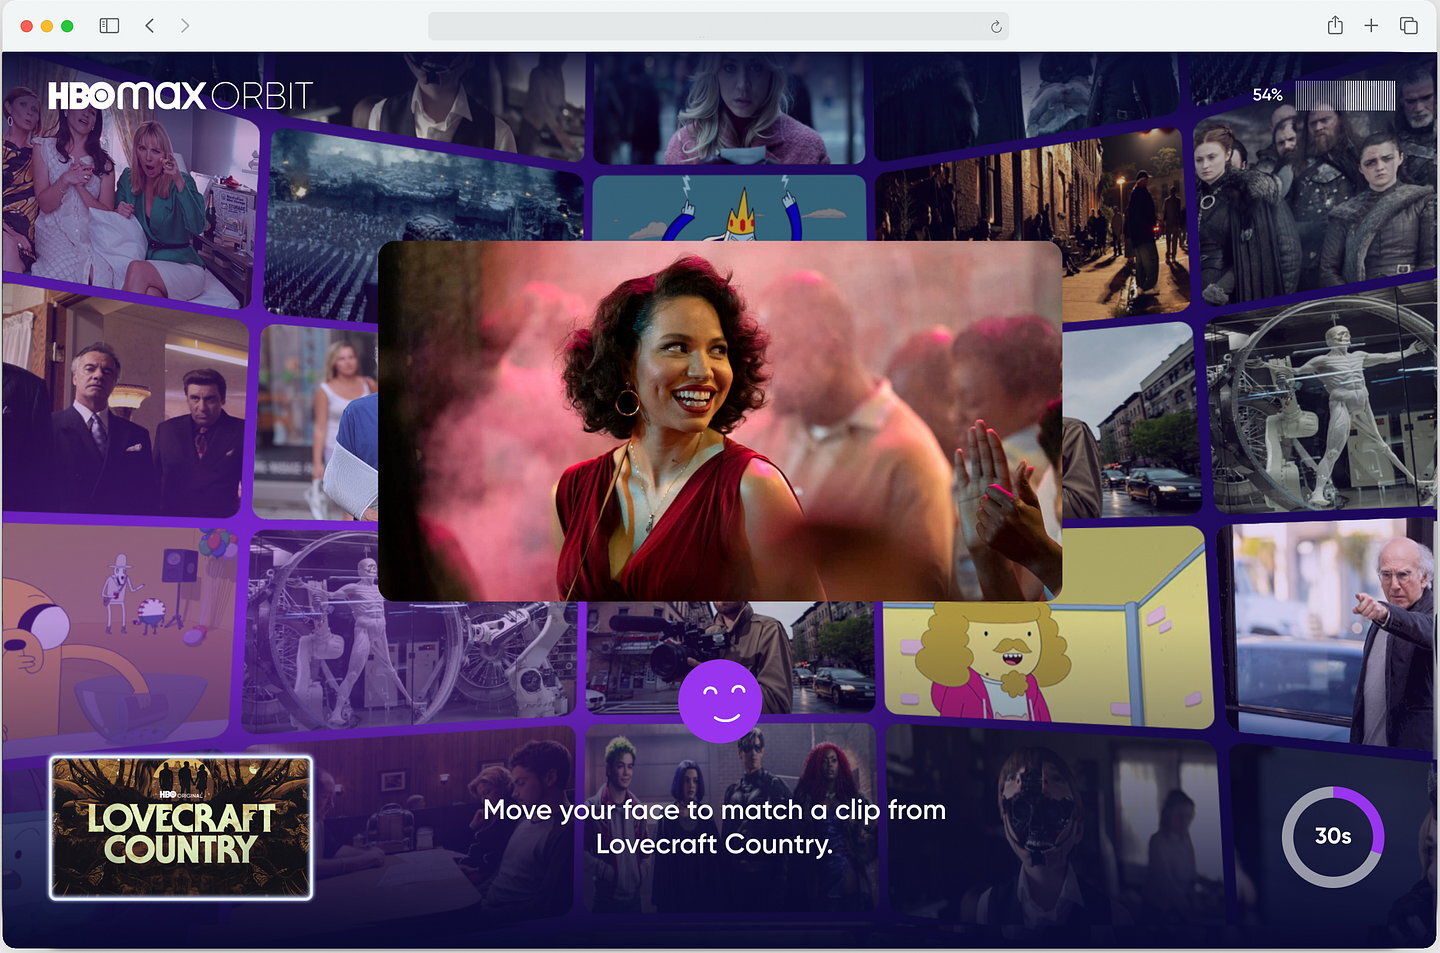 Screenshot from Dexigner: HBO Max Orbit pairing a user's face with a clip from Lovecraft Country.